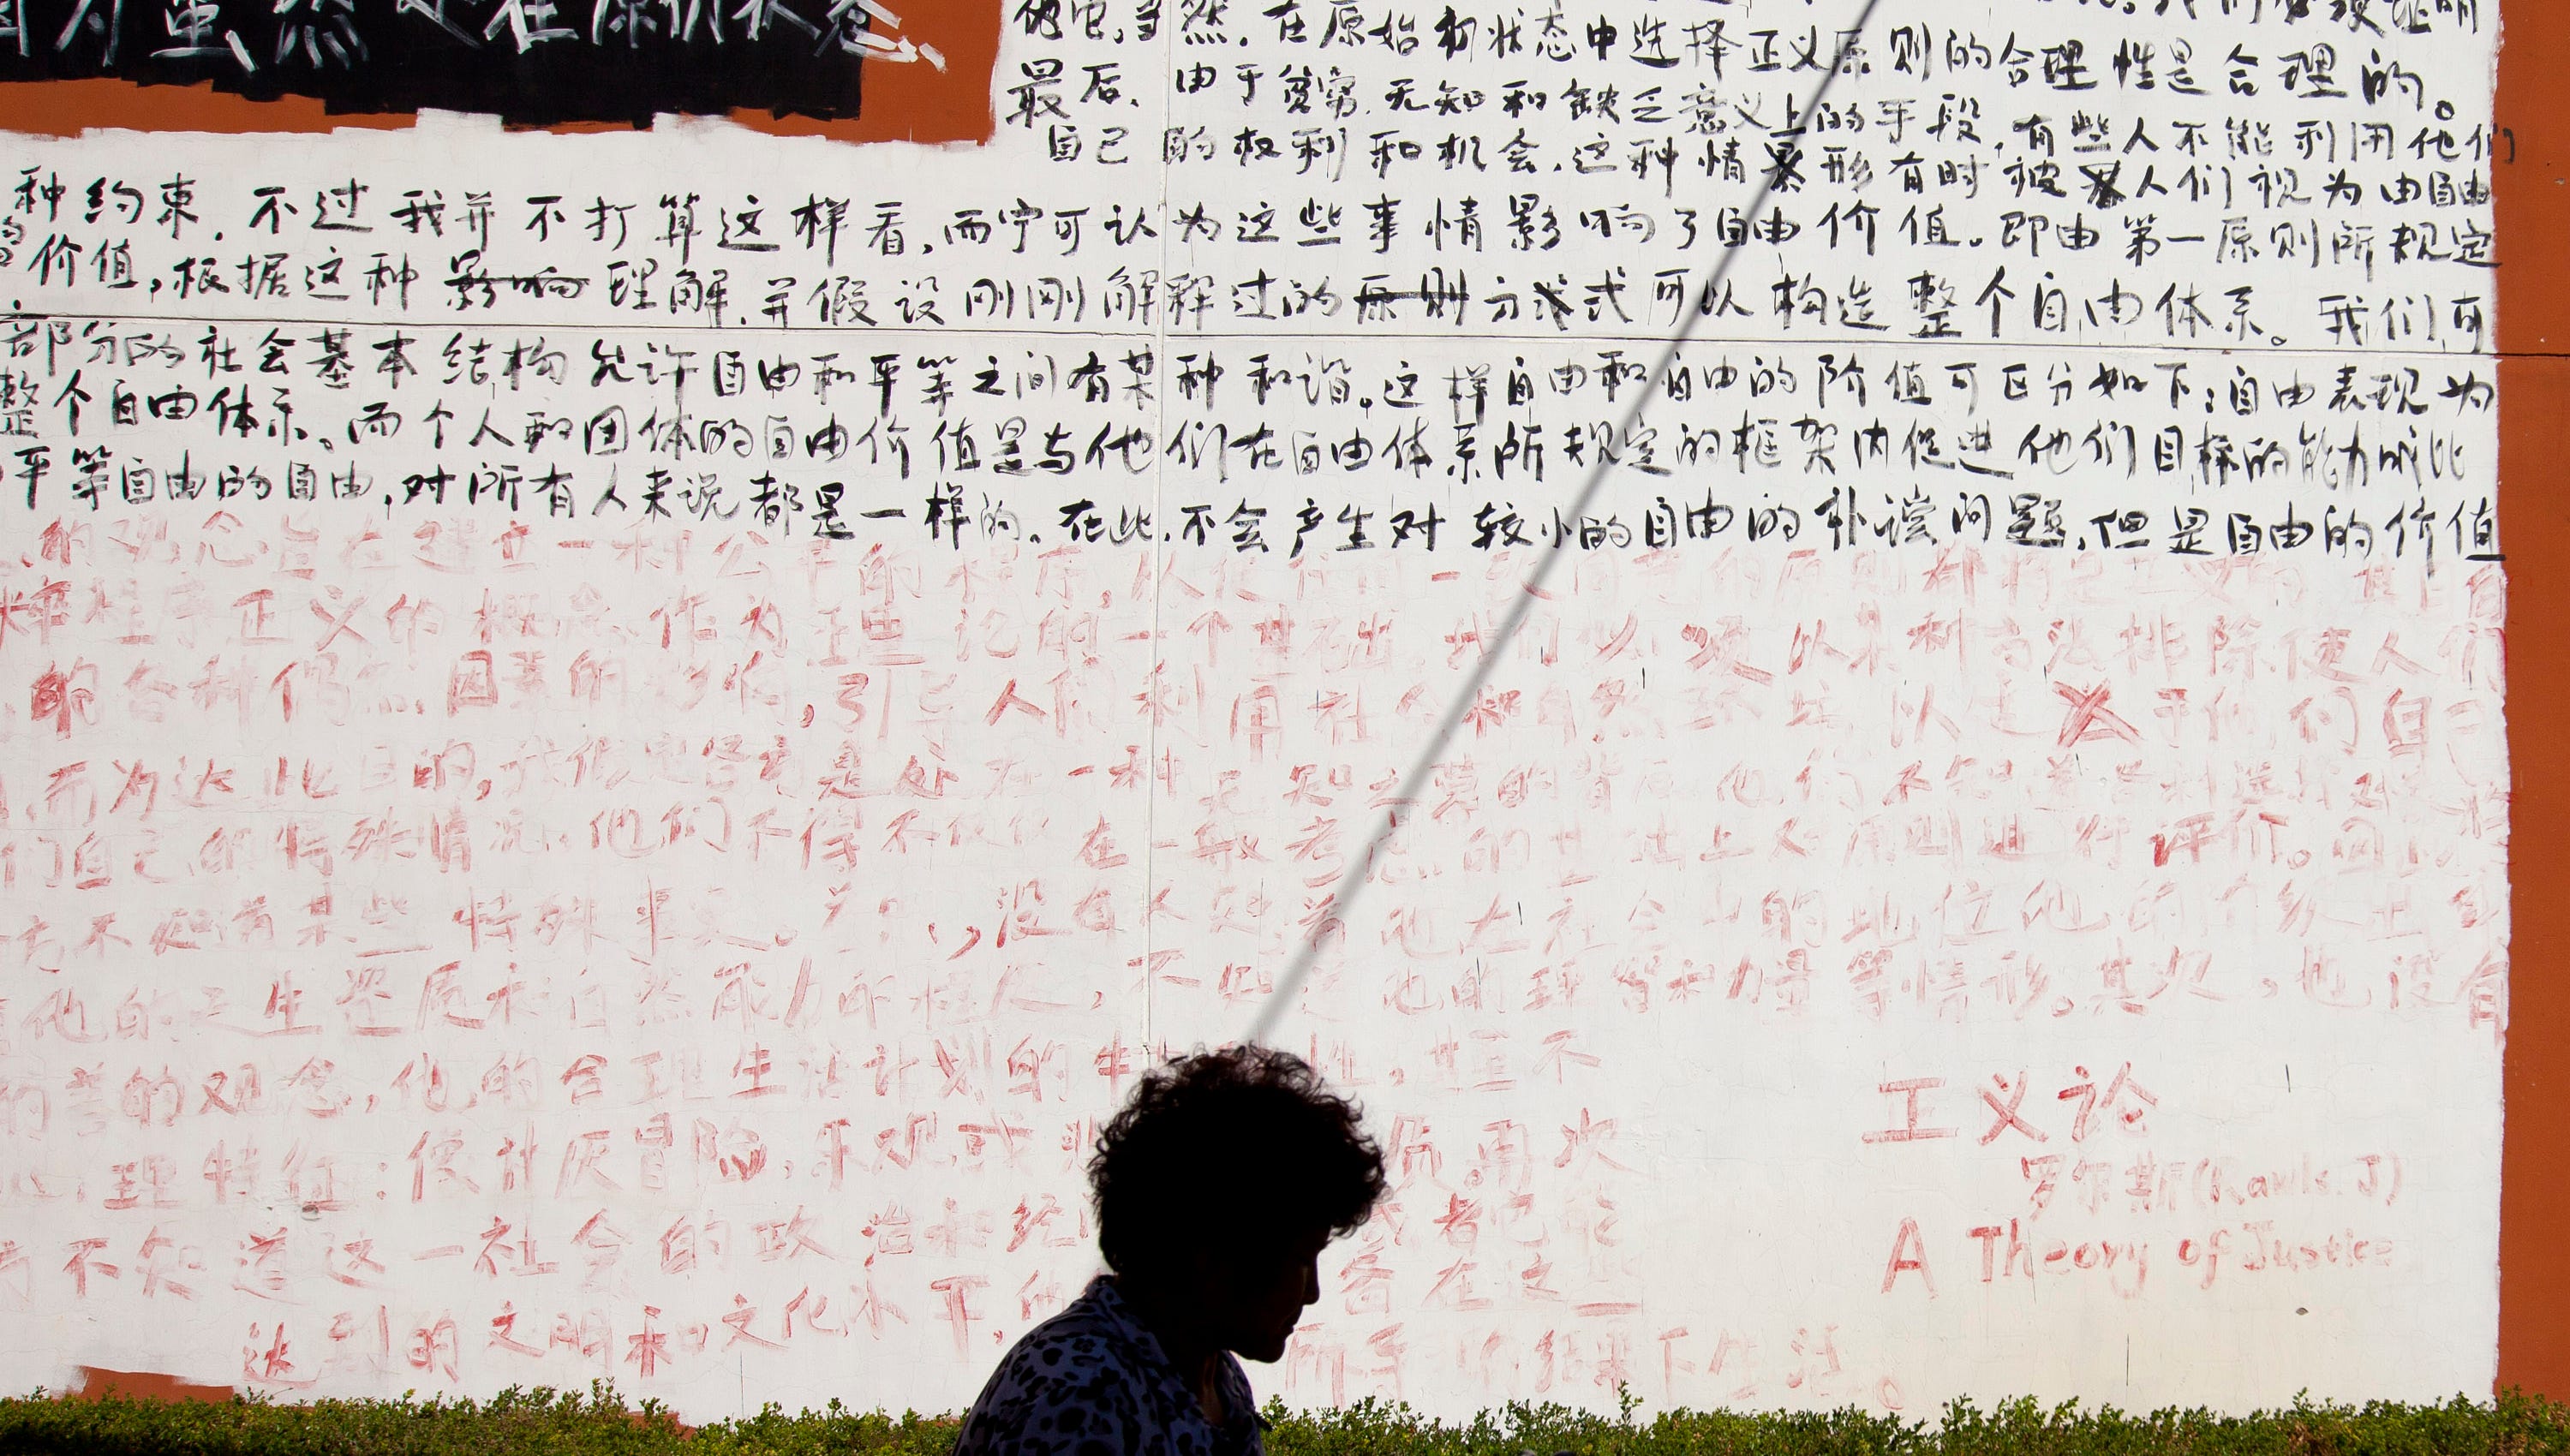 China's spelling bees aim to punctuate written word